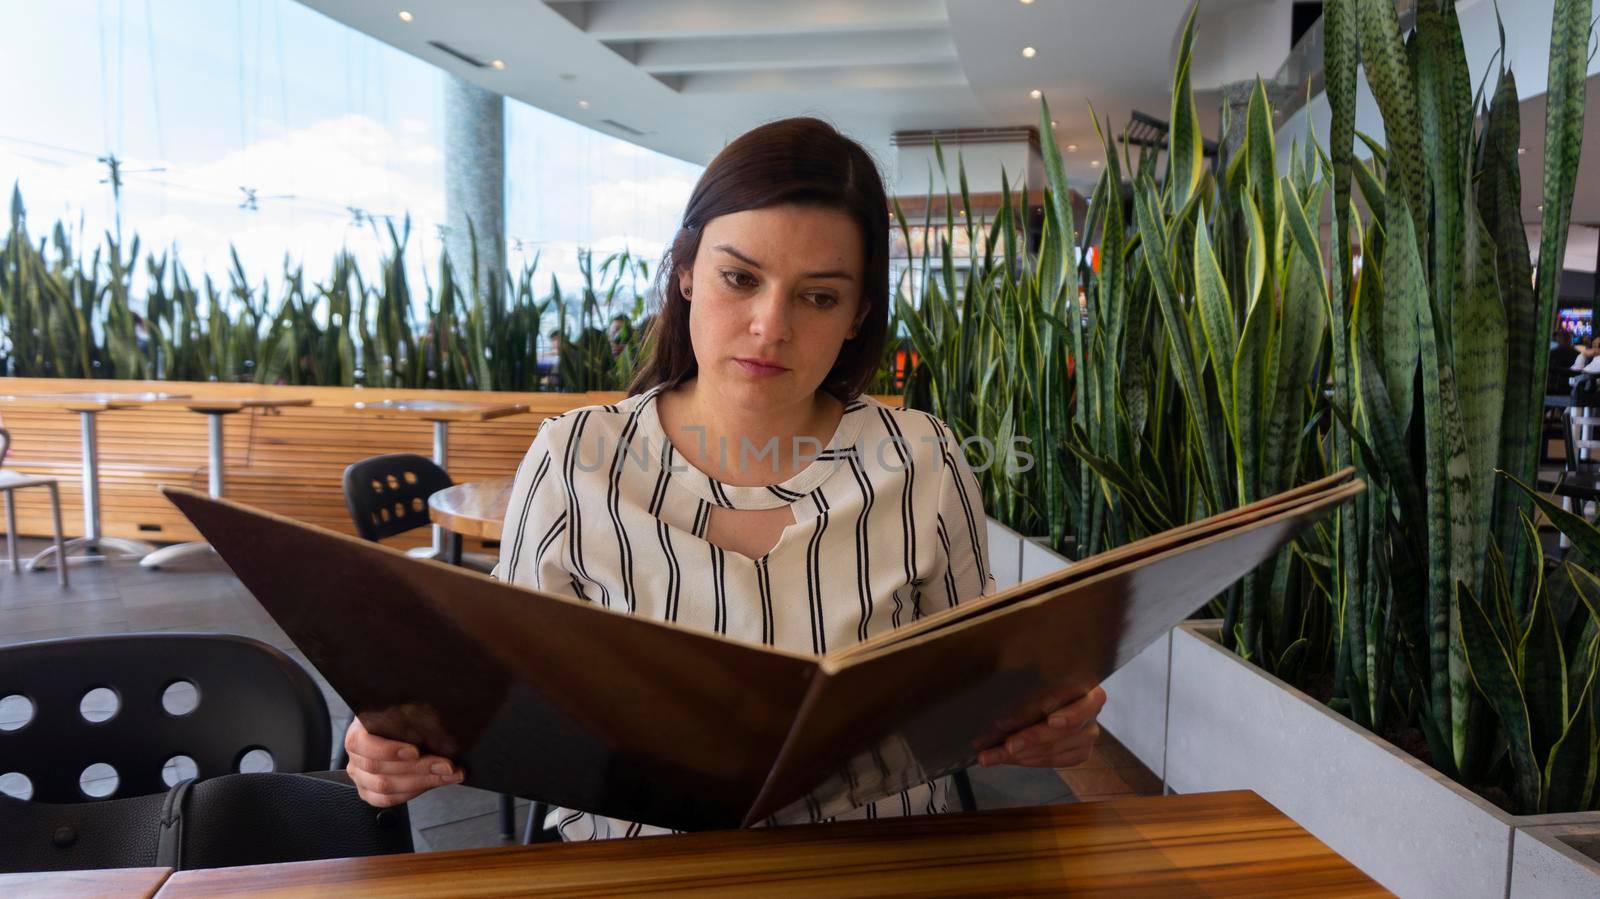 Close up on a beautiful Hispanic woman reading the menu sitting in front of a table in a restaurant adorned with plants